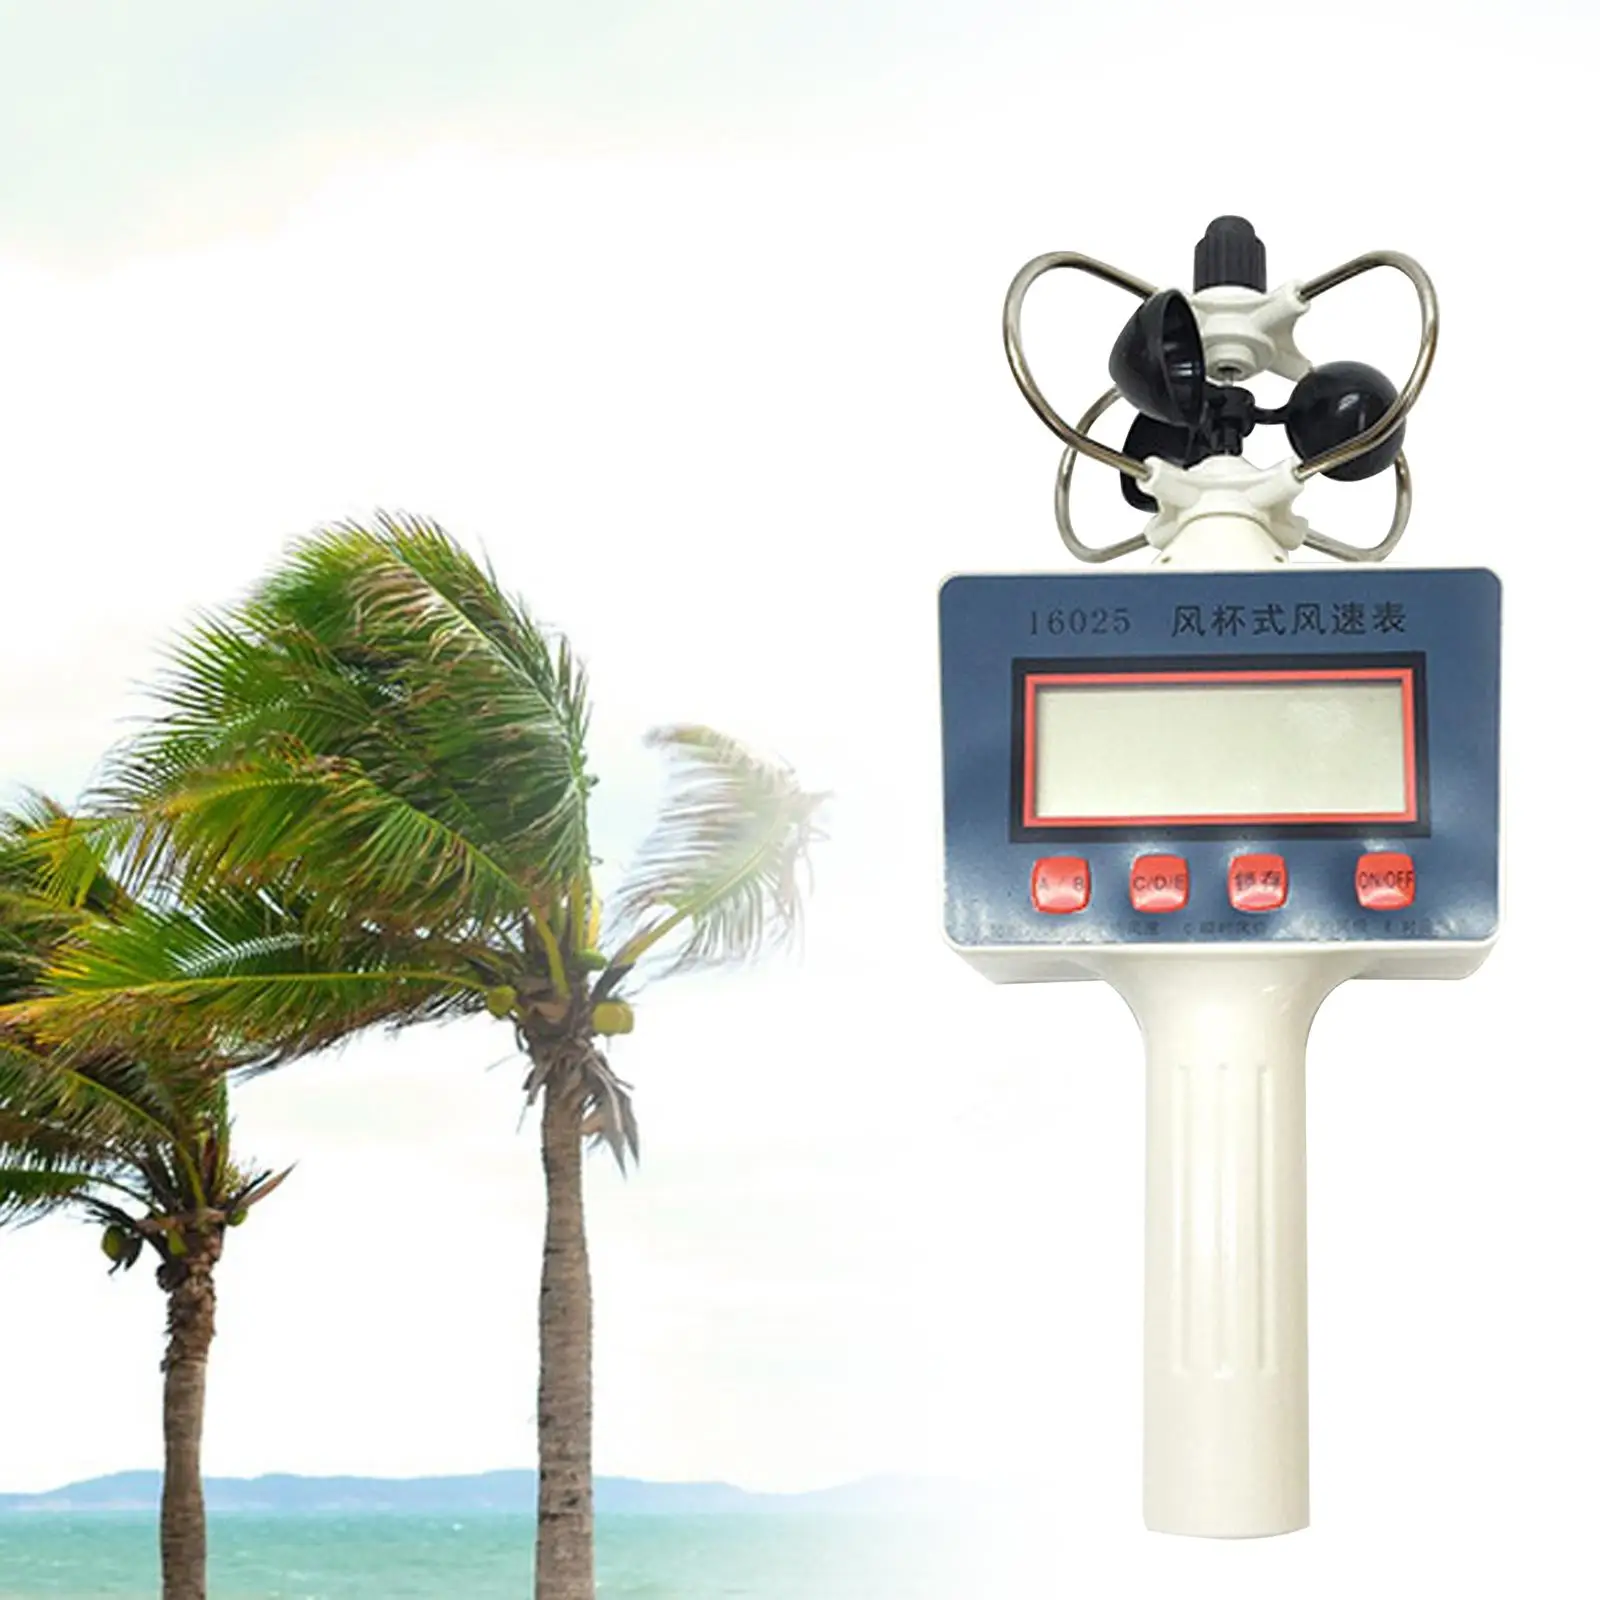 Cup Anemometer Accurate Portable Wind Gauges Tool Handheld Anemometer for Outdoor Sailing Dust Collection System Surfing Hunting